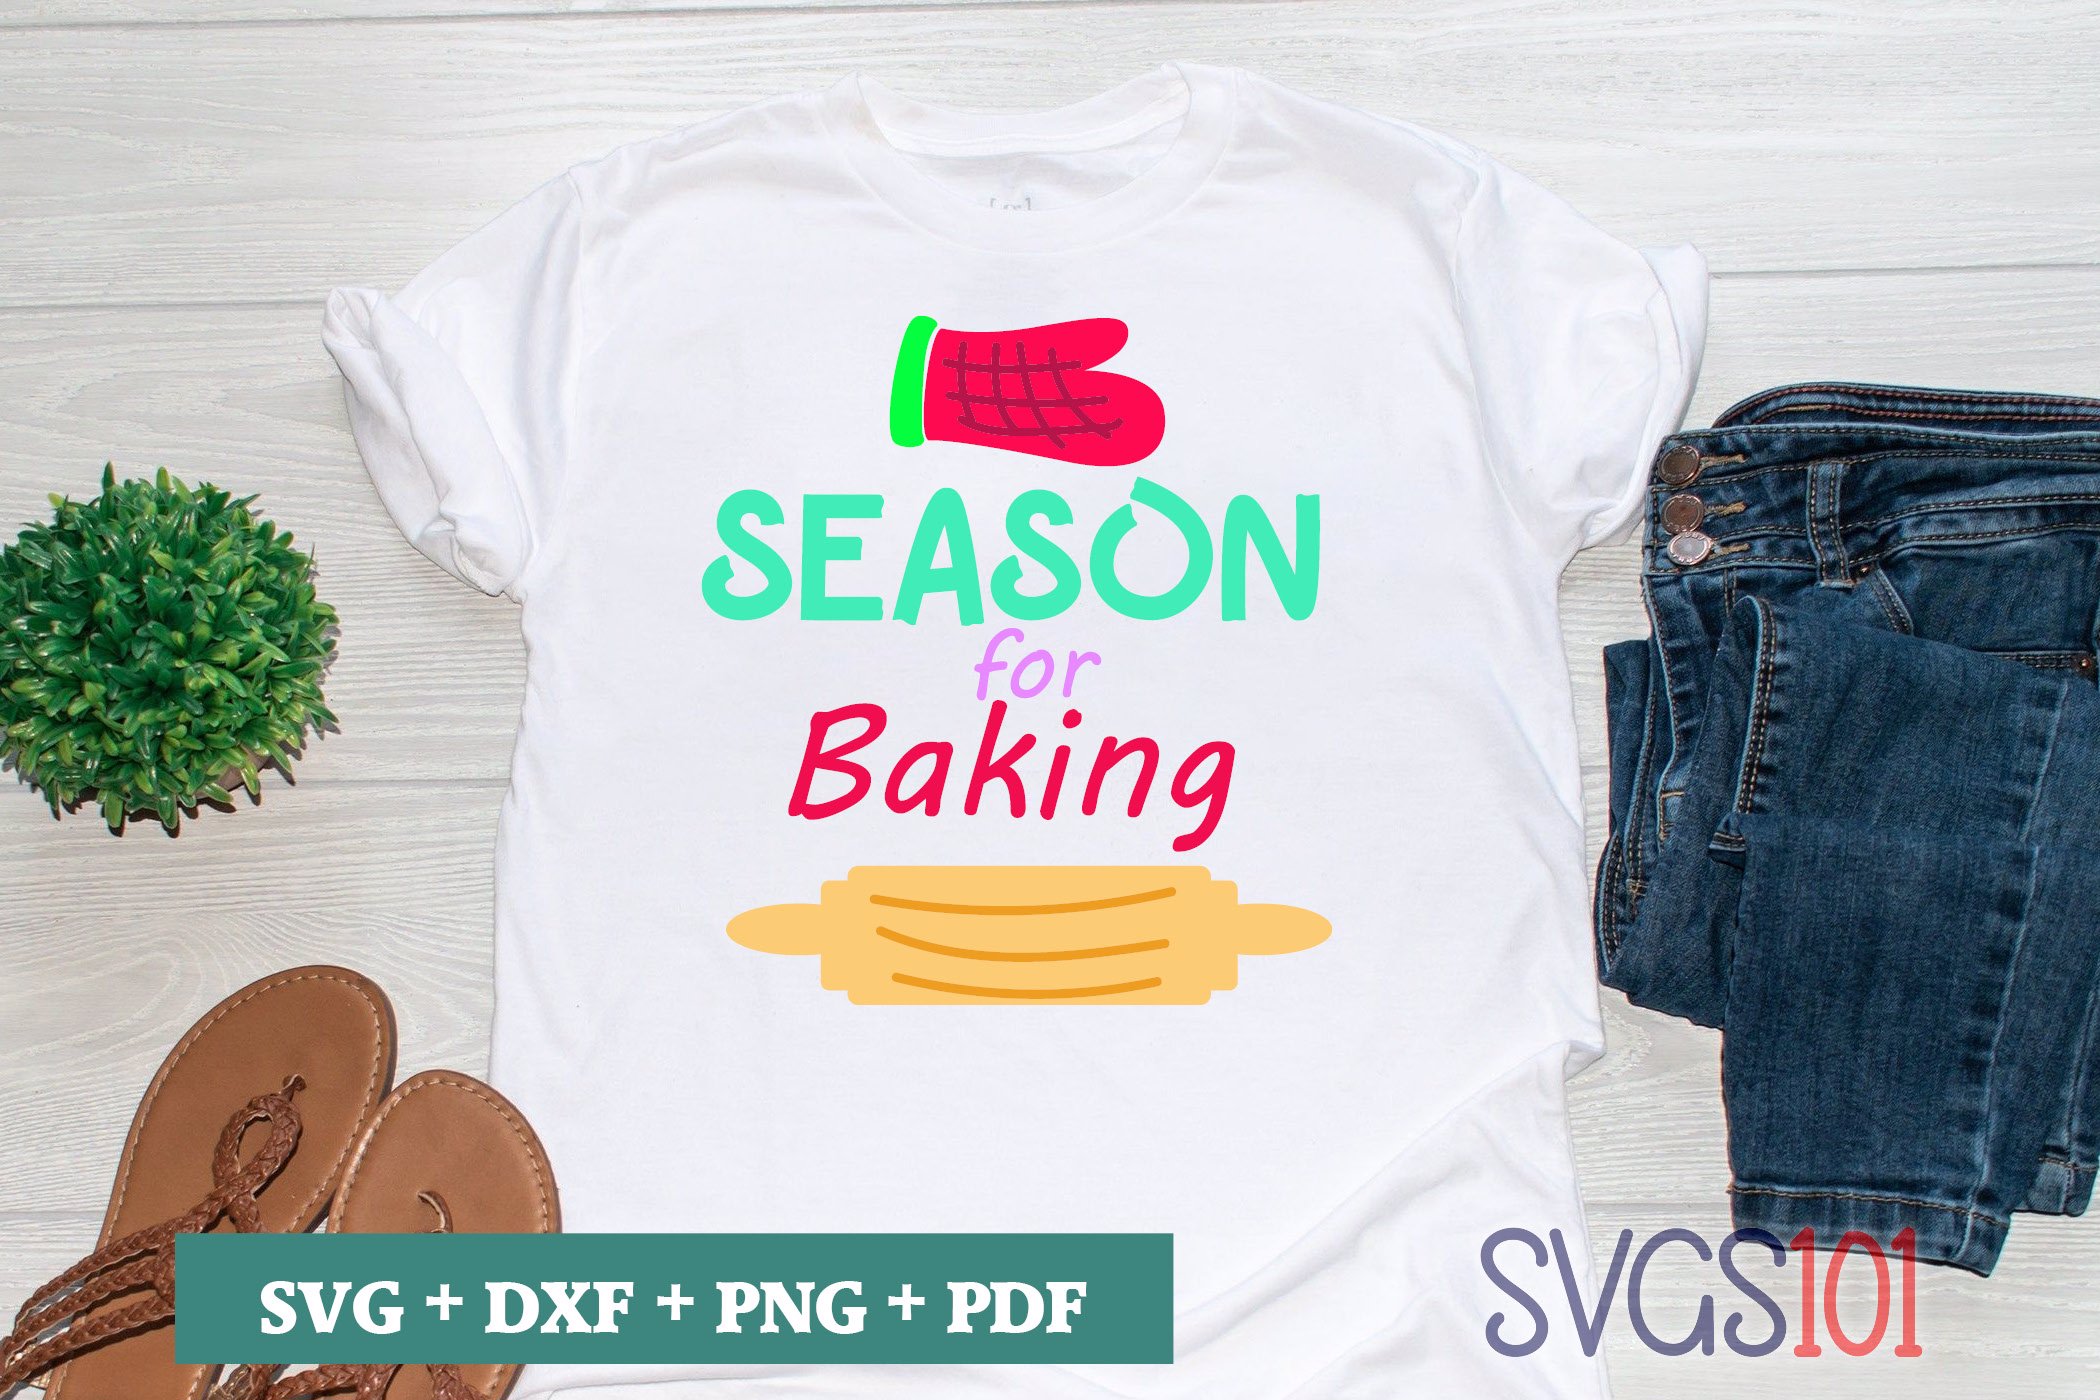 Season For Baking SVG Cuttable file - DXF, EPS, PNG, PDF | SVG Cutting File